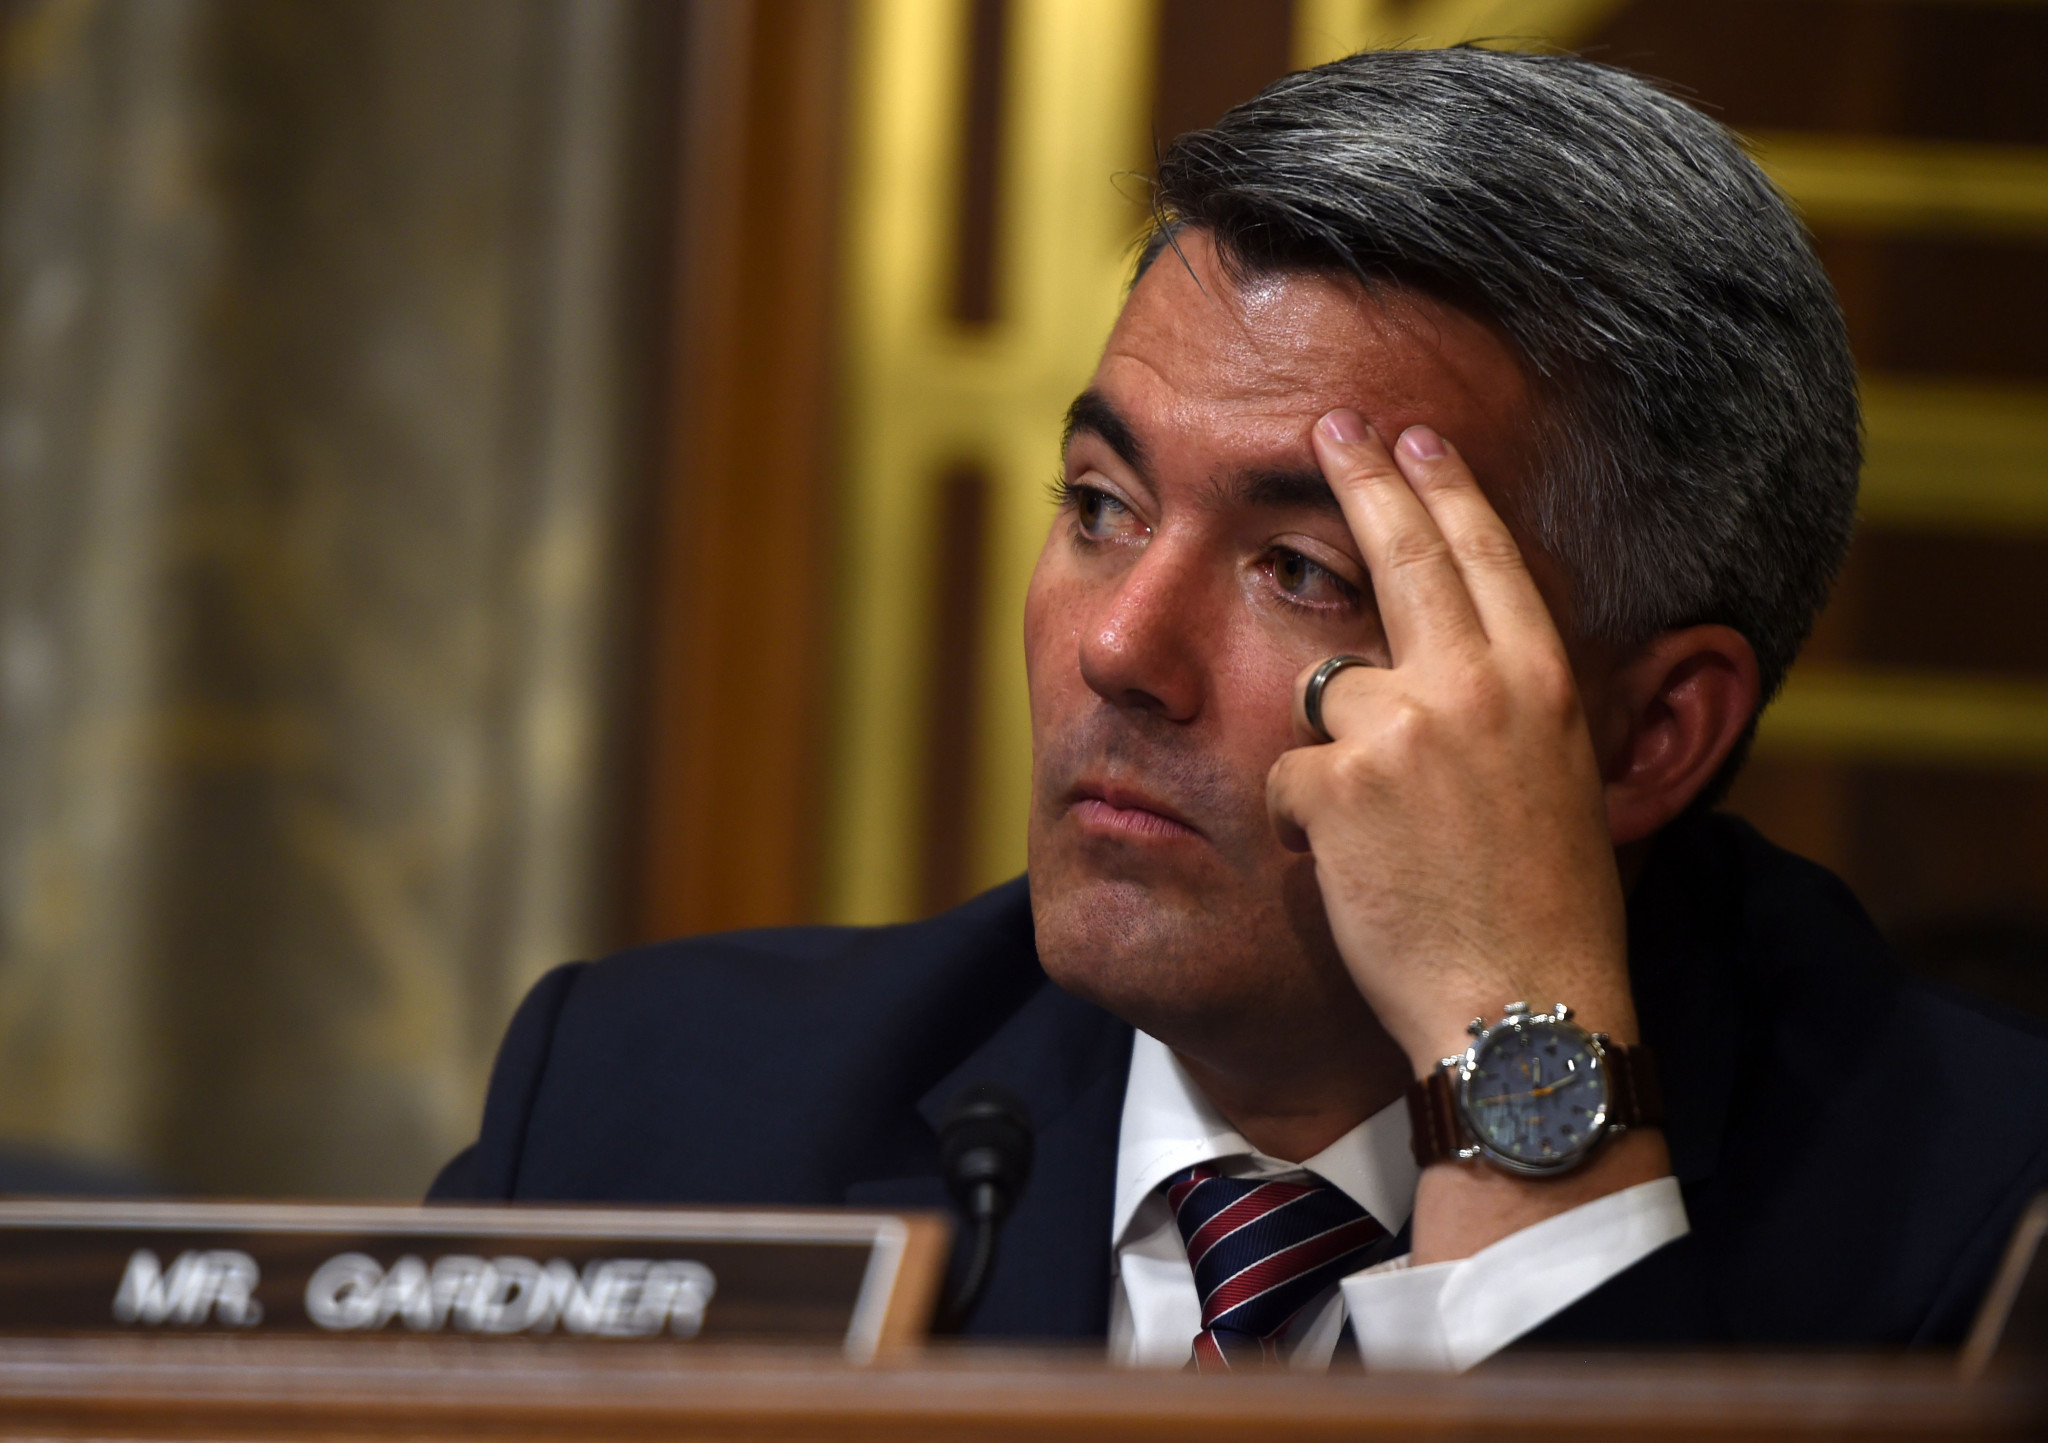 Senator Cory Gardner has introduced legislation which, if approved, could see a Commission assess the structure of USOC ©Getty Images